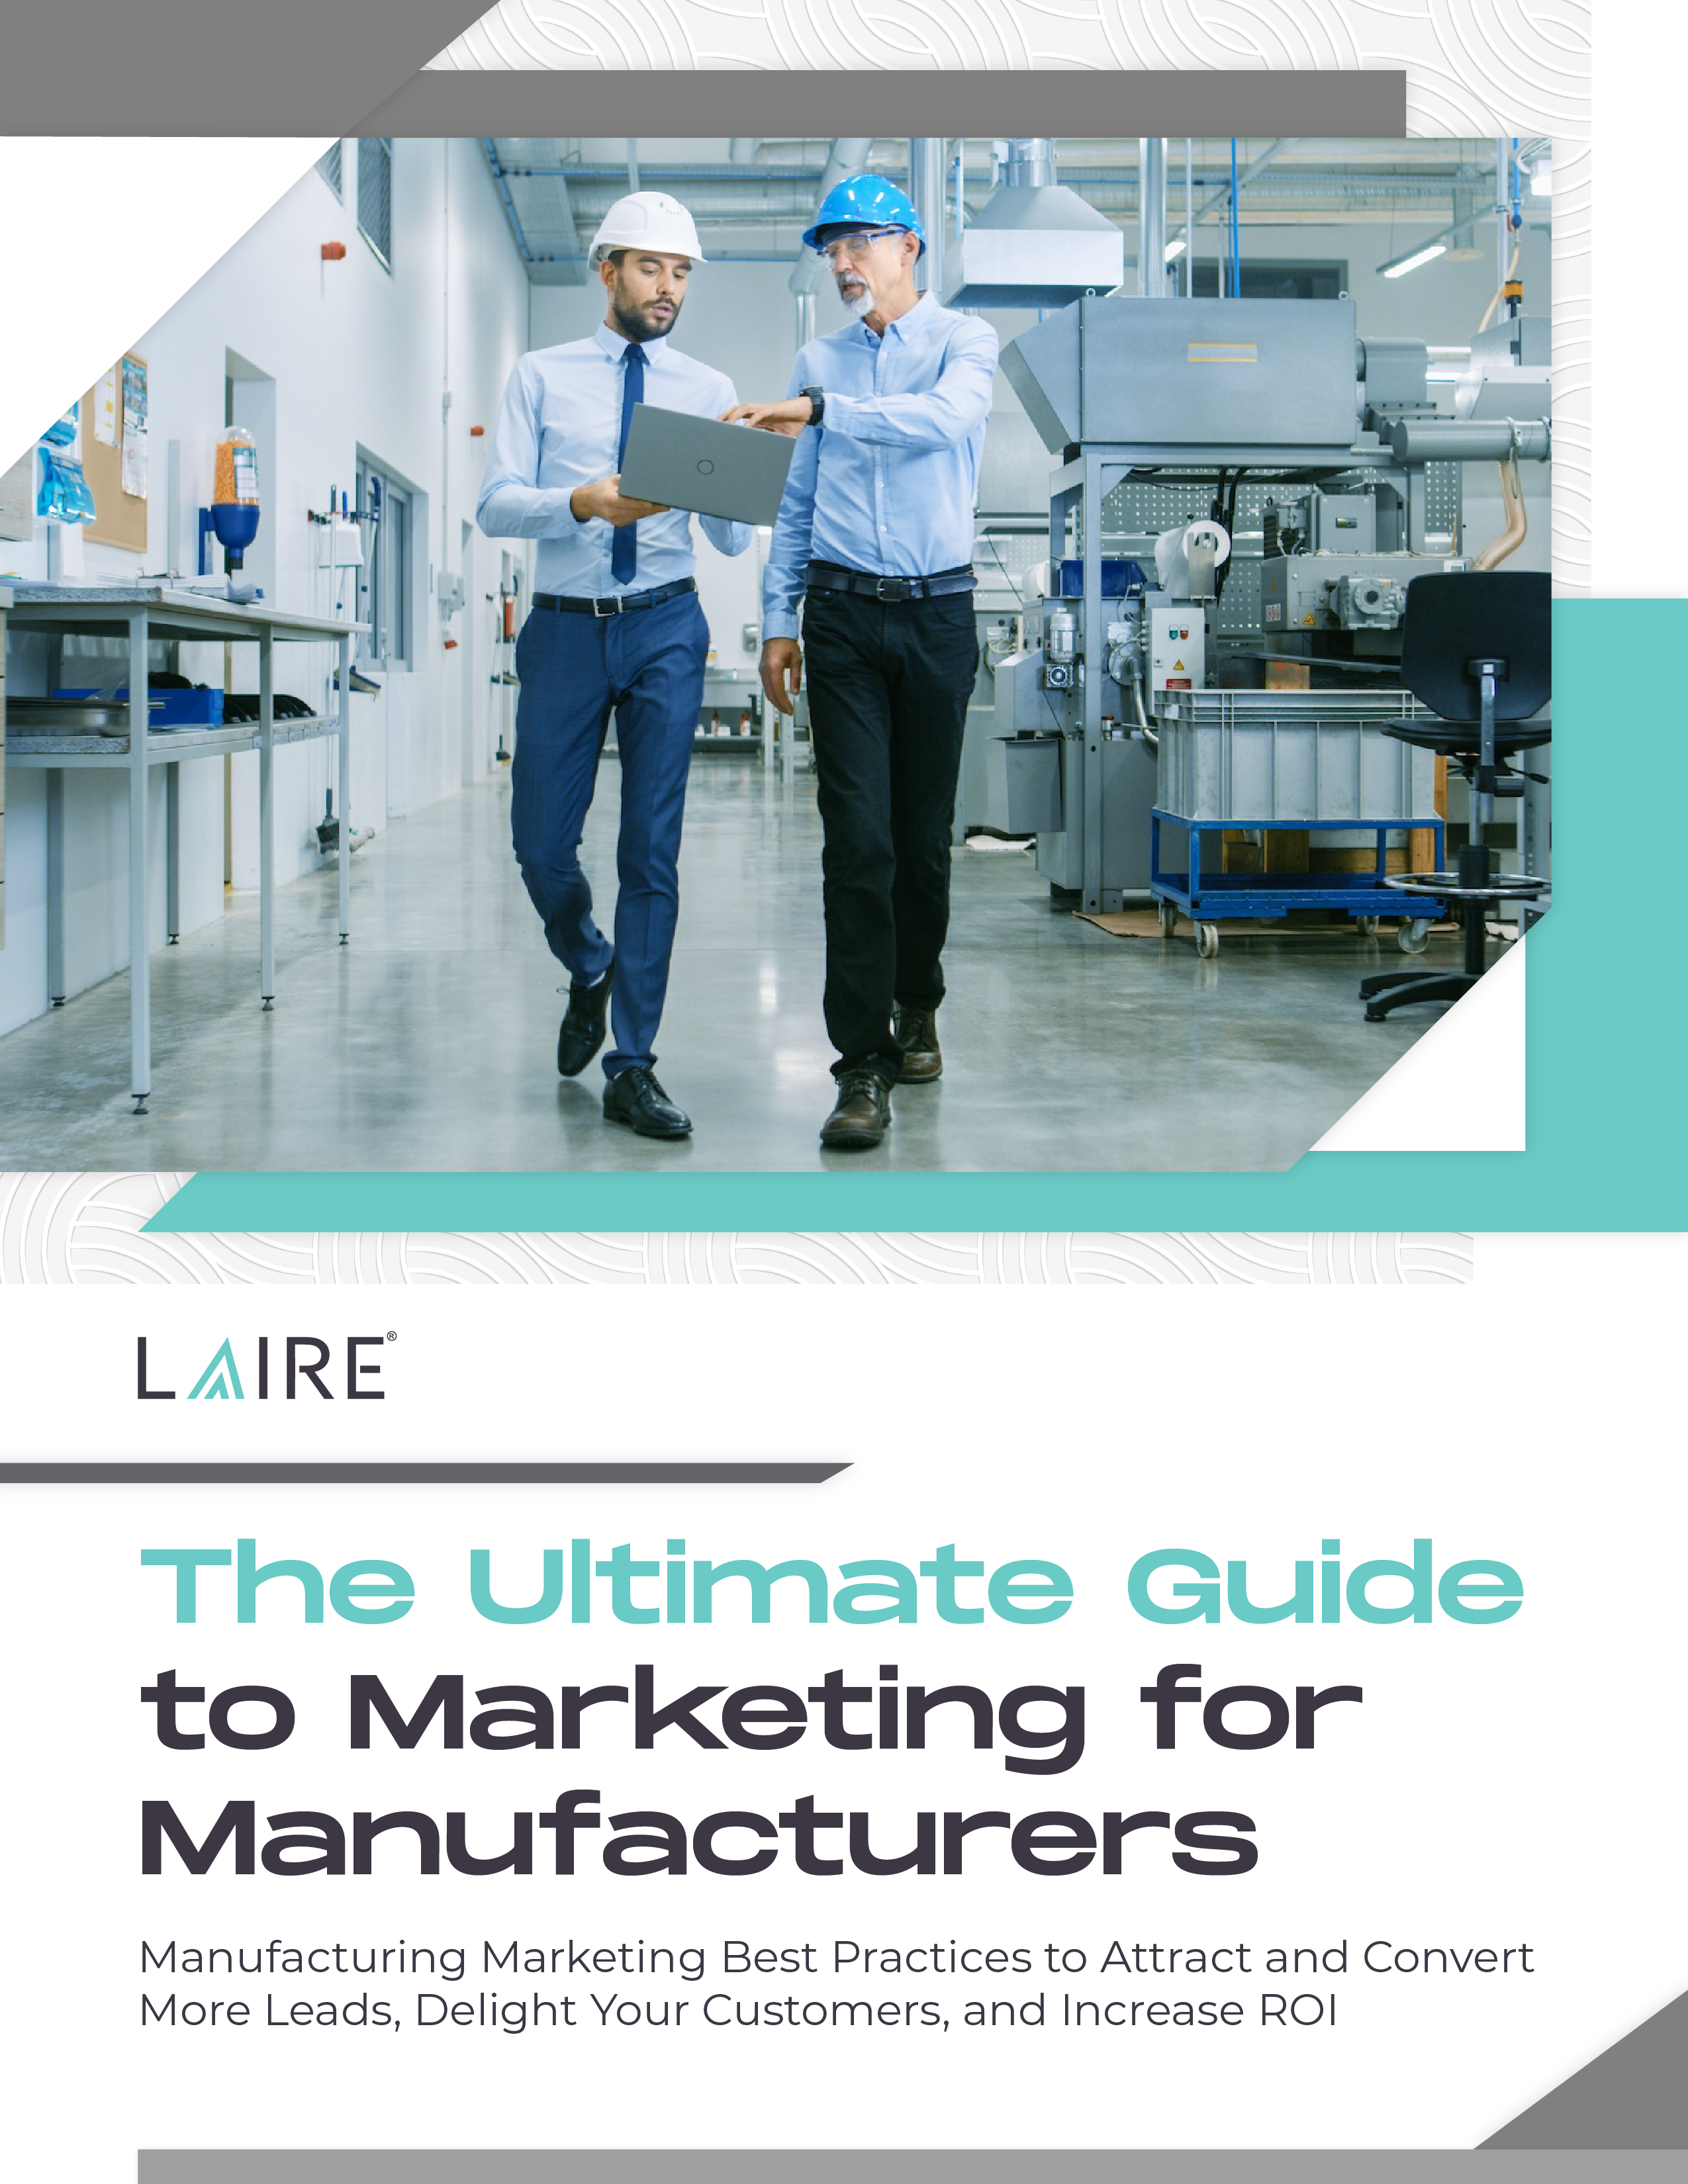 The Ultimate Guide to Marketing for Manufacturers